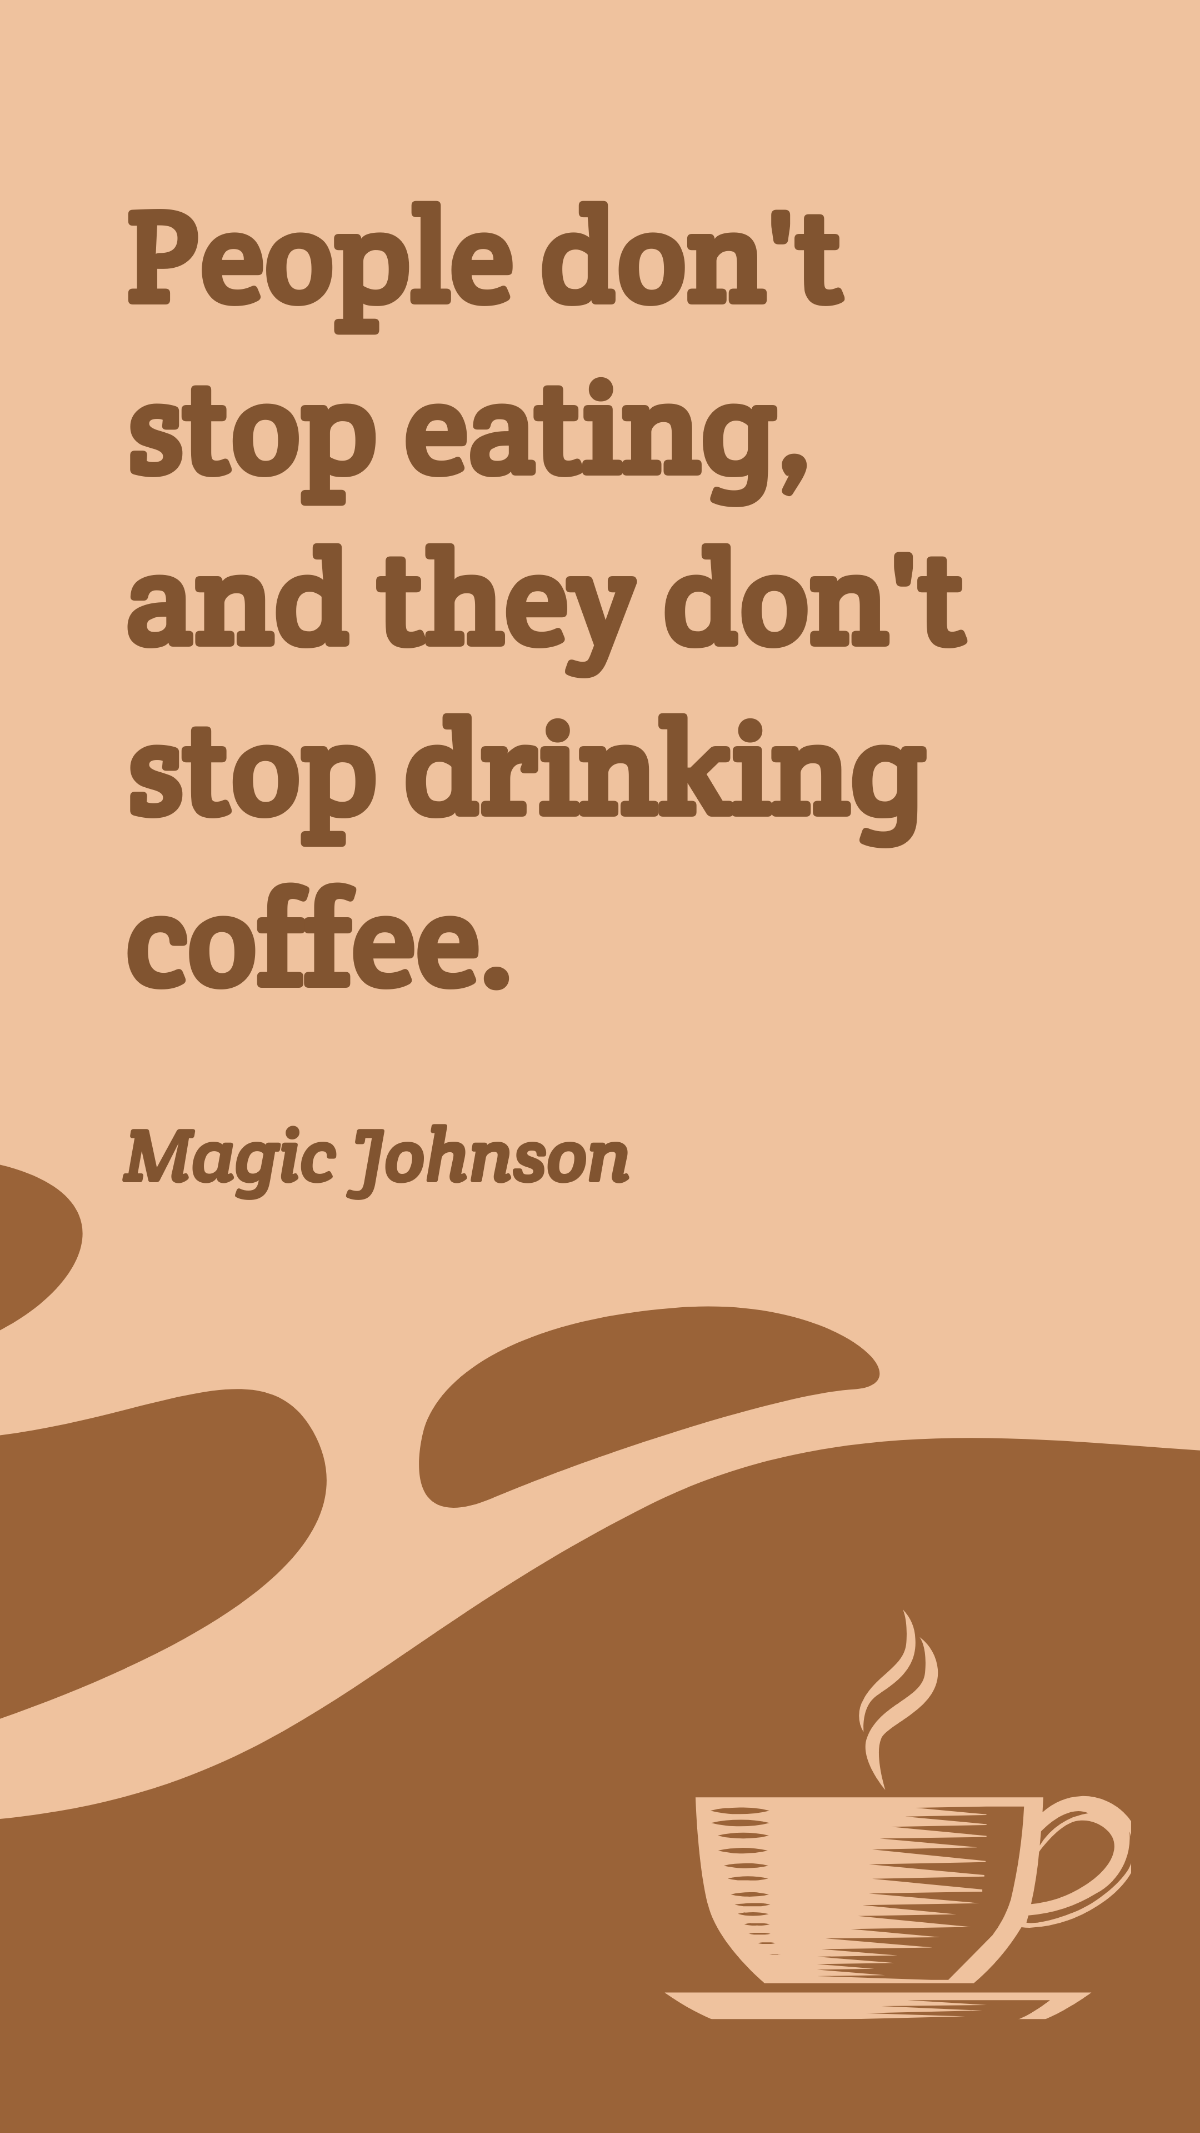 Magic Johnson - People don't stop eating, and they don't stop drinking coffee.